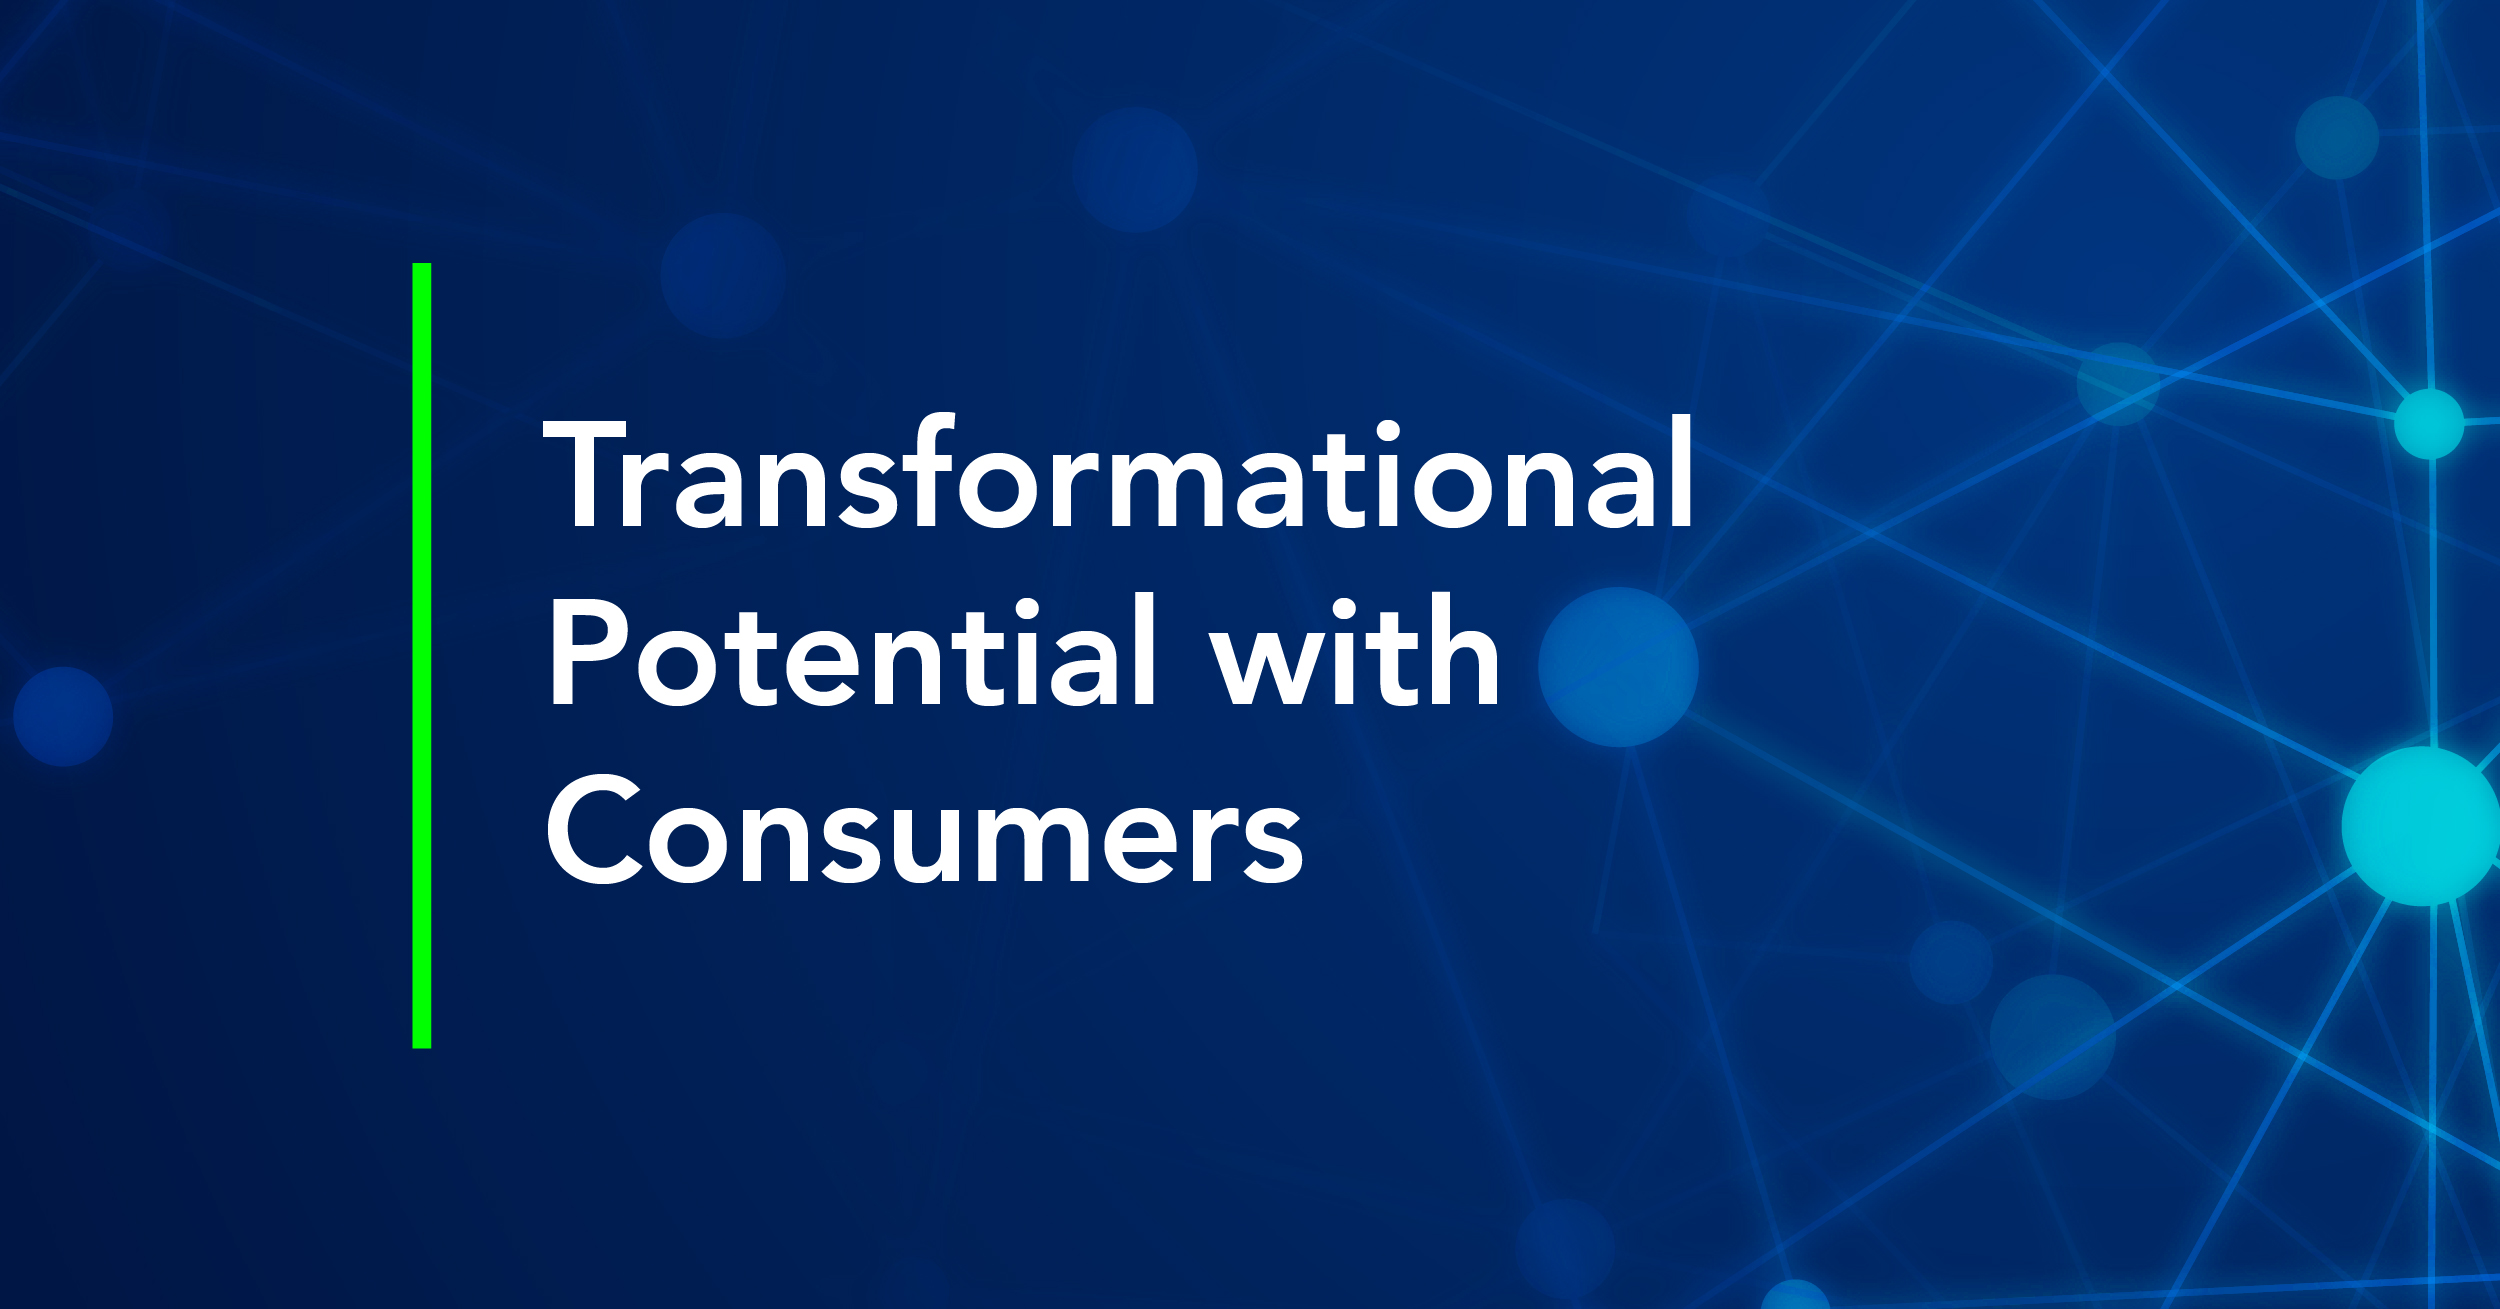 Transformational Potential with Consumers